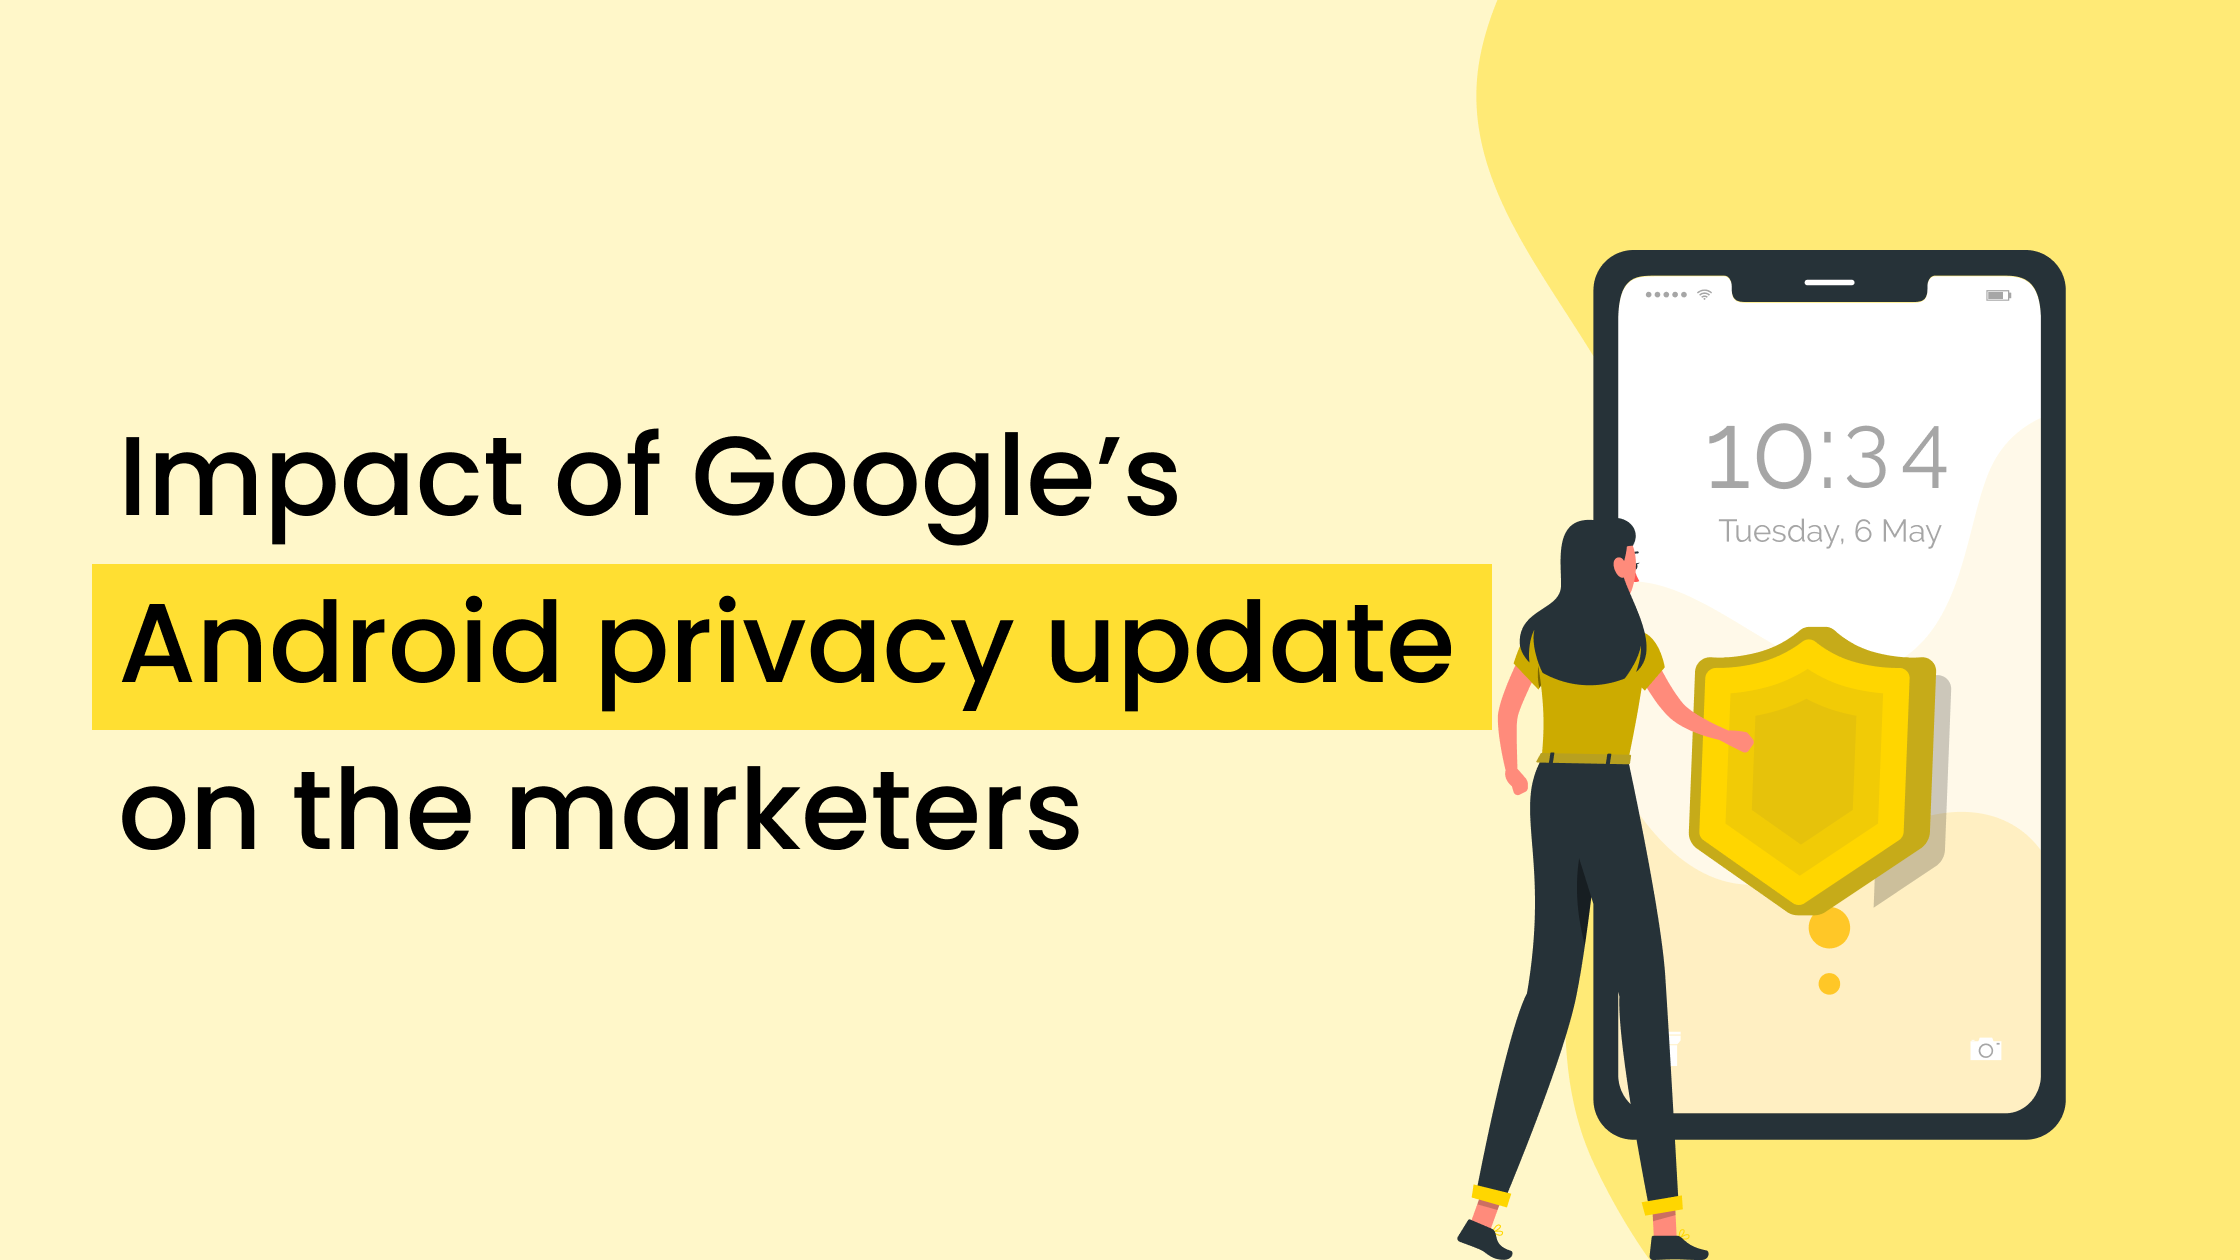 Impact of Google’s Android privacy update on the marketers